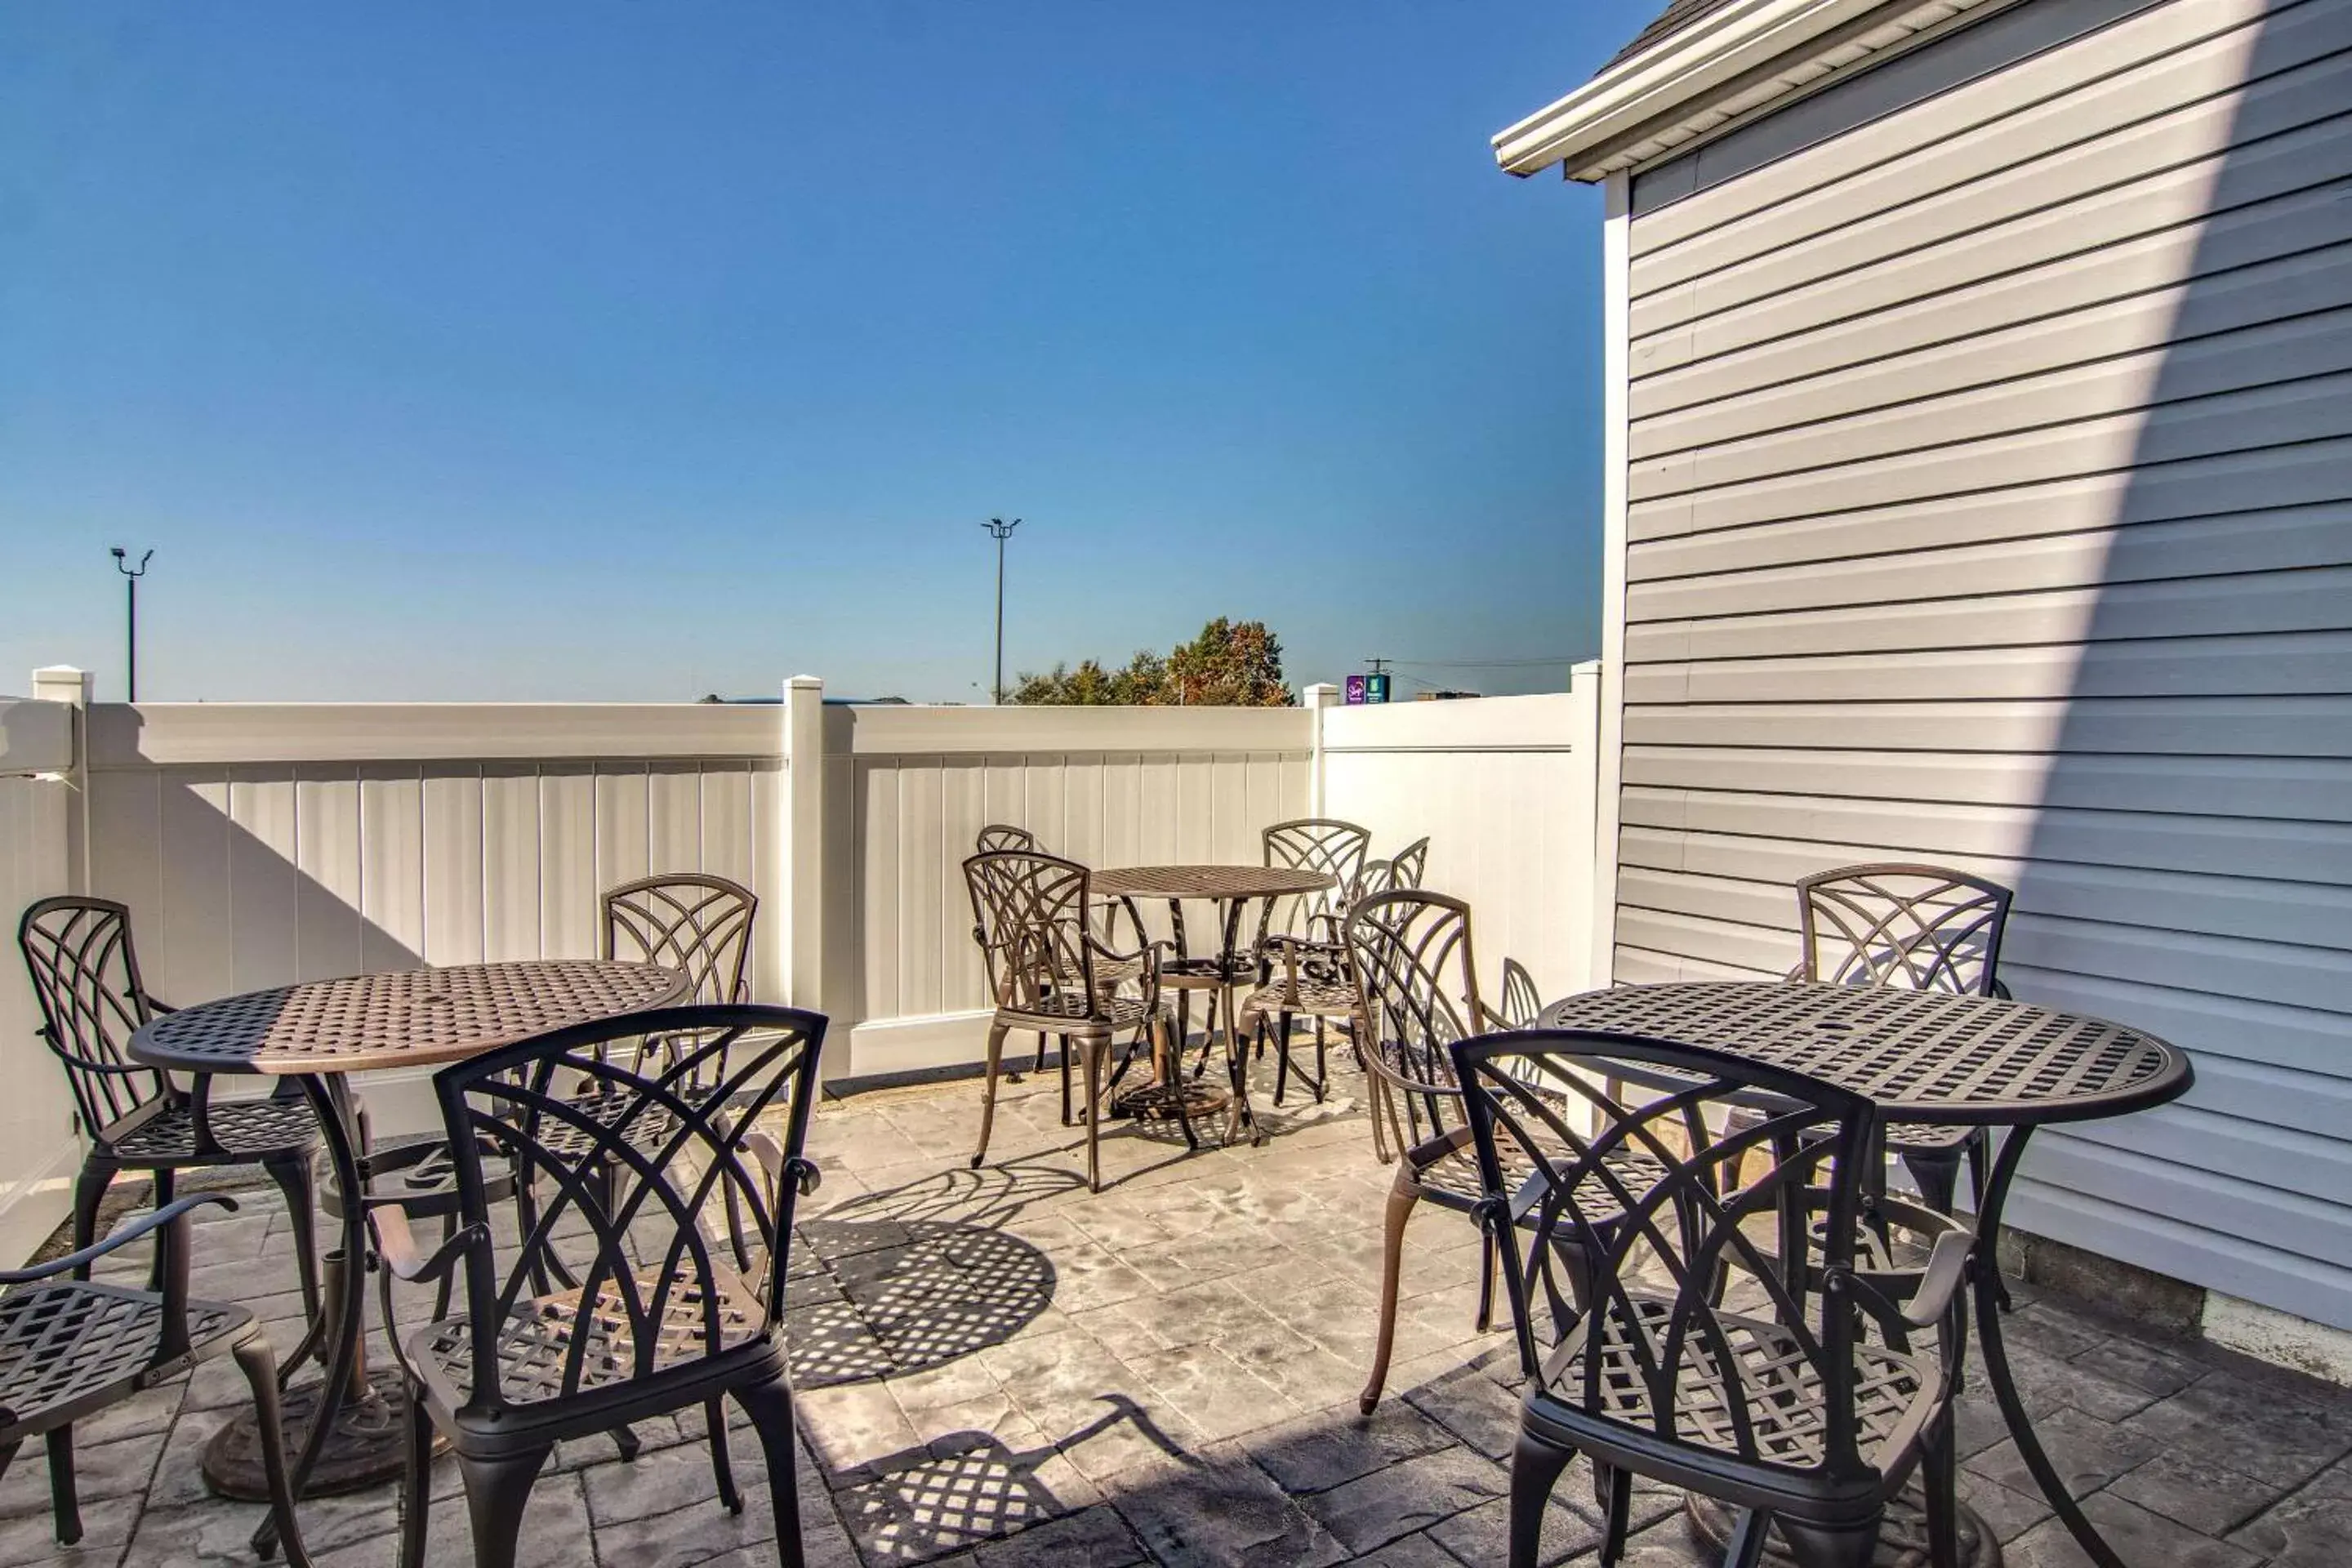 Patio, Balcony/Terrace in MainStay Suites Clarion, PA near I-80